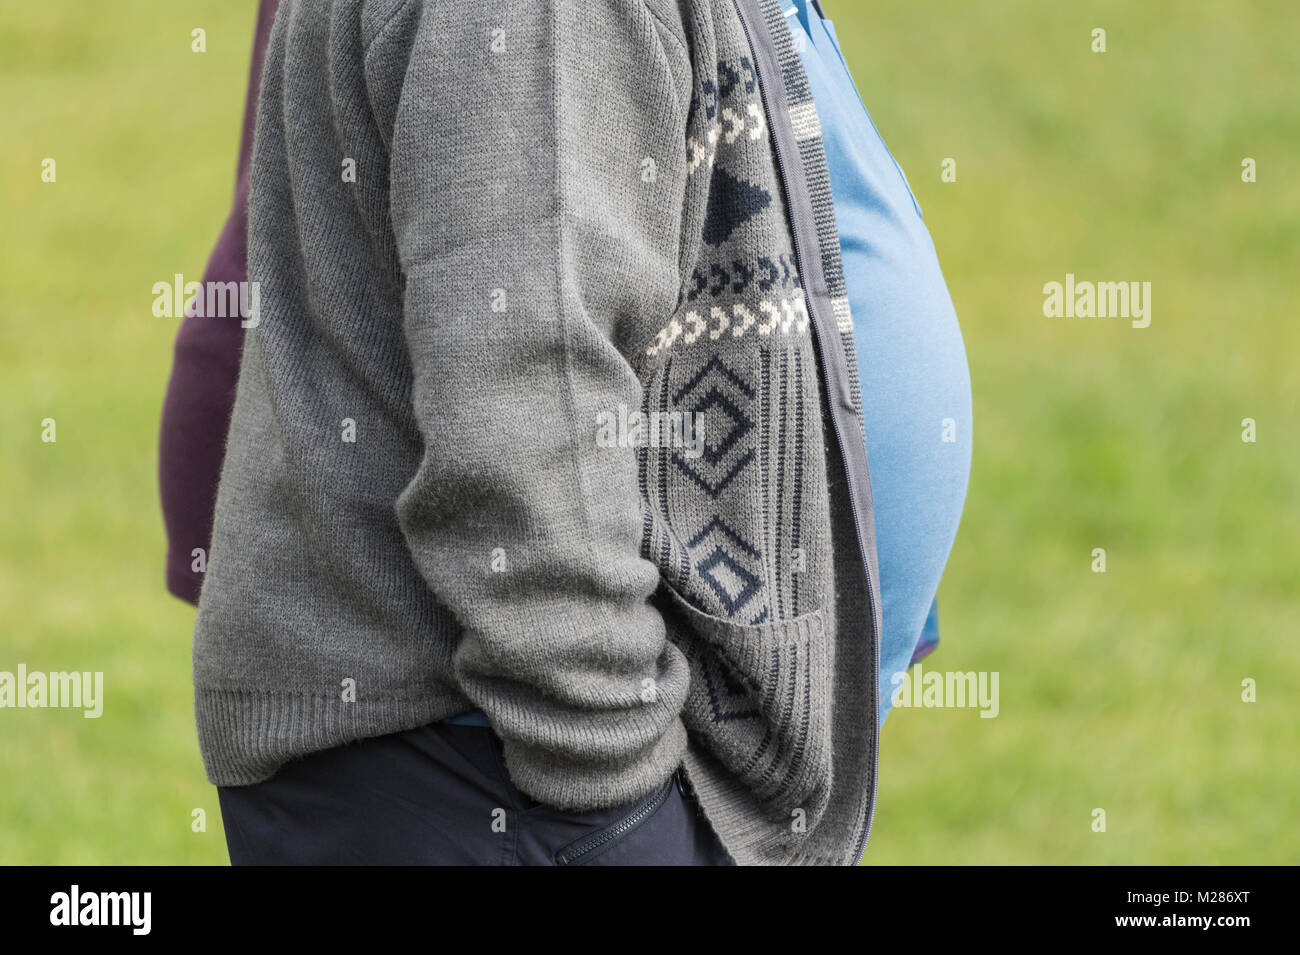 Profile of the waste of a large obese overweight man with a large tummy sticking out, in the UK. Stock Photo